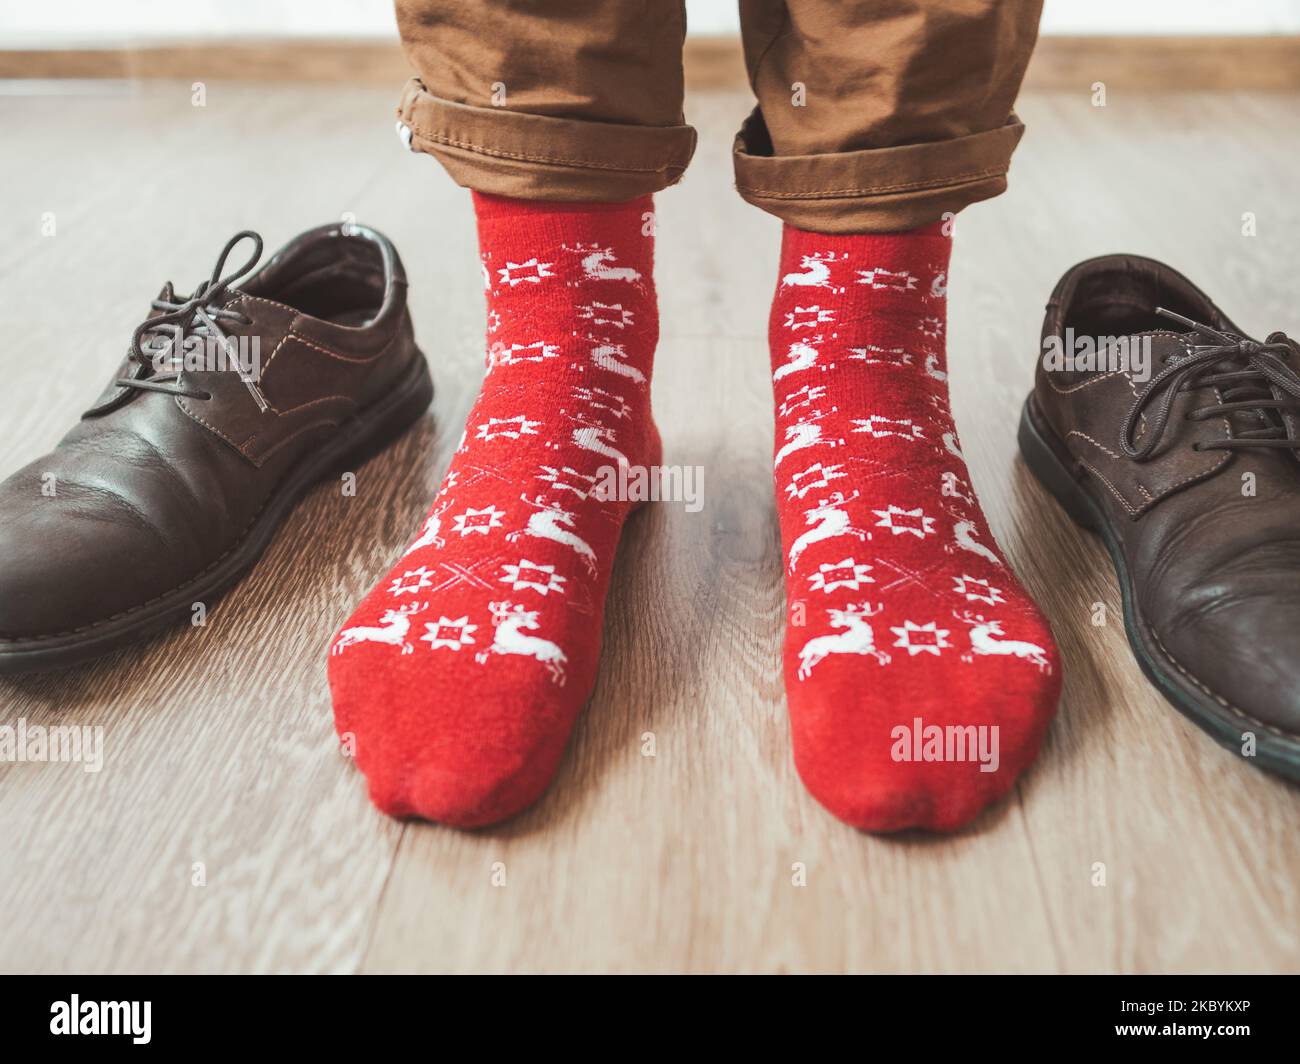 Young man in chinos trousers and bright red socks with reindeers on them is ready to wear suede shoes. Scandinavian pattern. Winter holiday spirit. Stock Photo